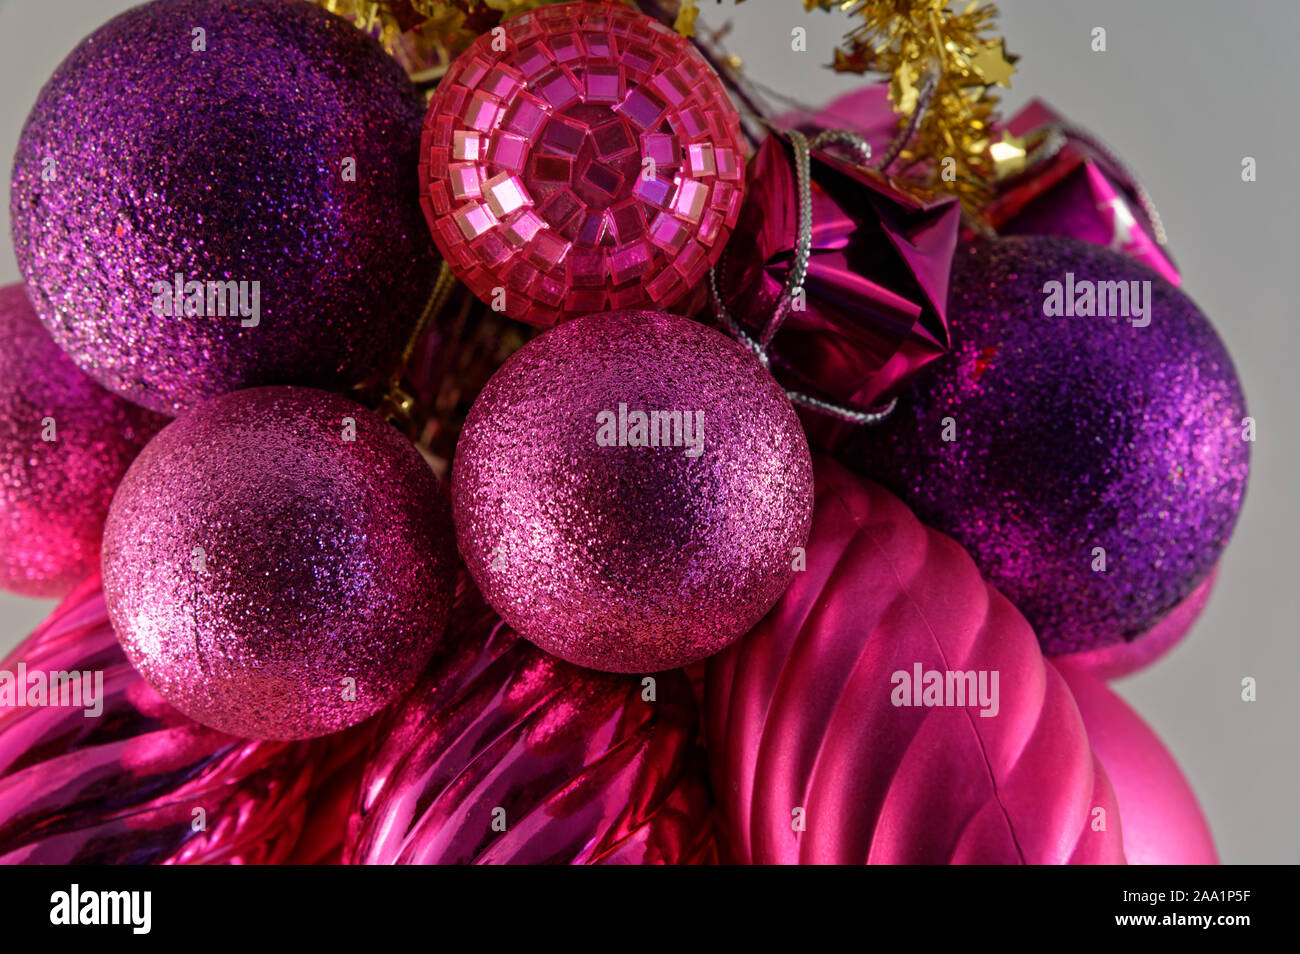 Purple and red Christmas decorations with gold tinsel on a grey background Stock Photo